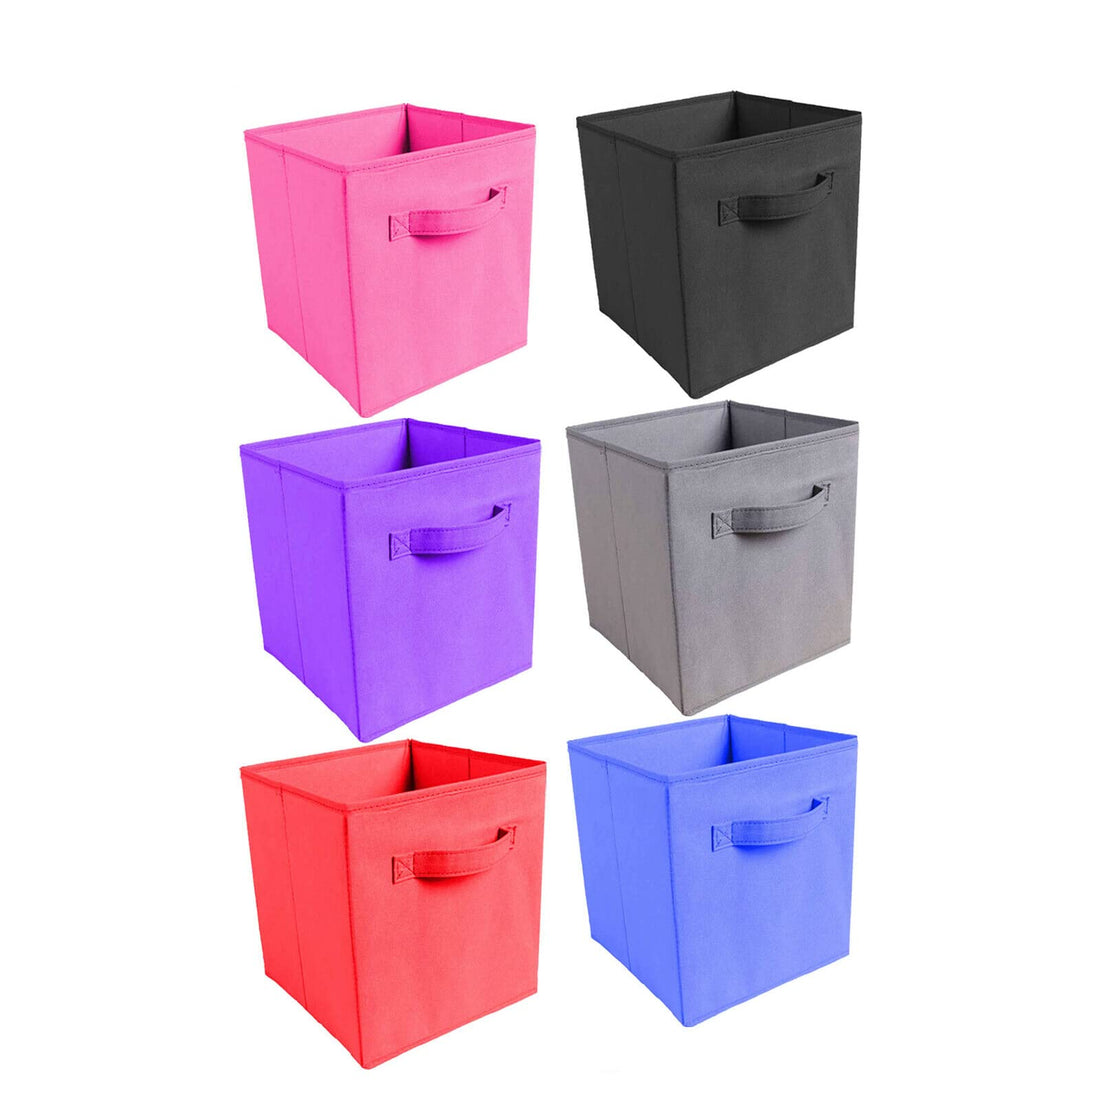 YNR Foldable Storage Boxes, Set of 4 Storage Cubes, Collapsible Fabric Box Organiser